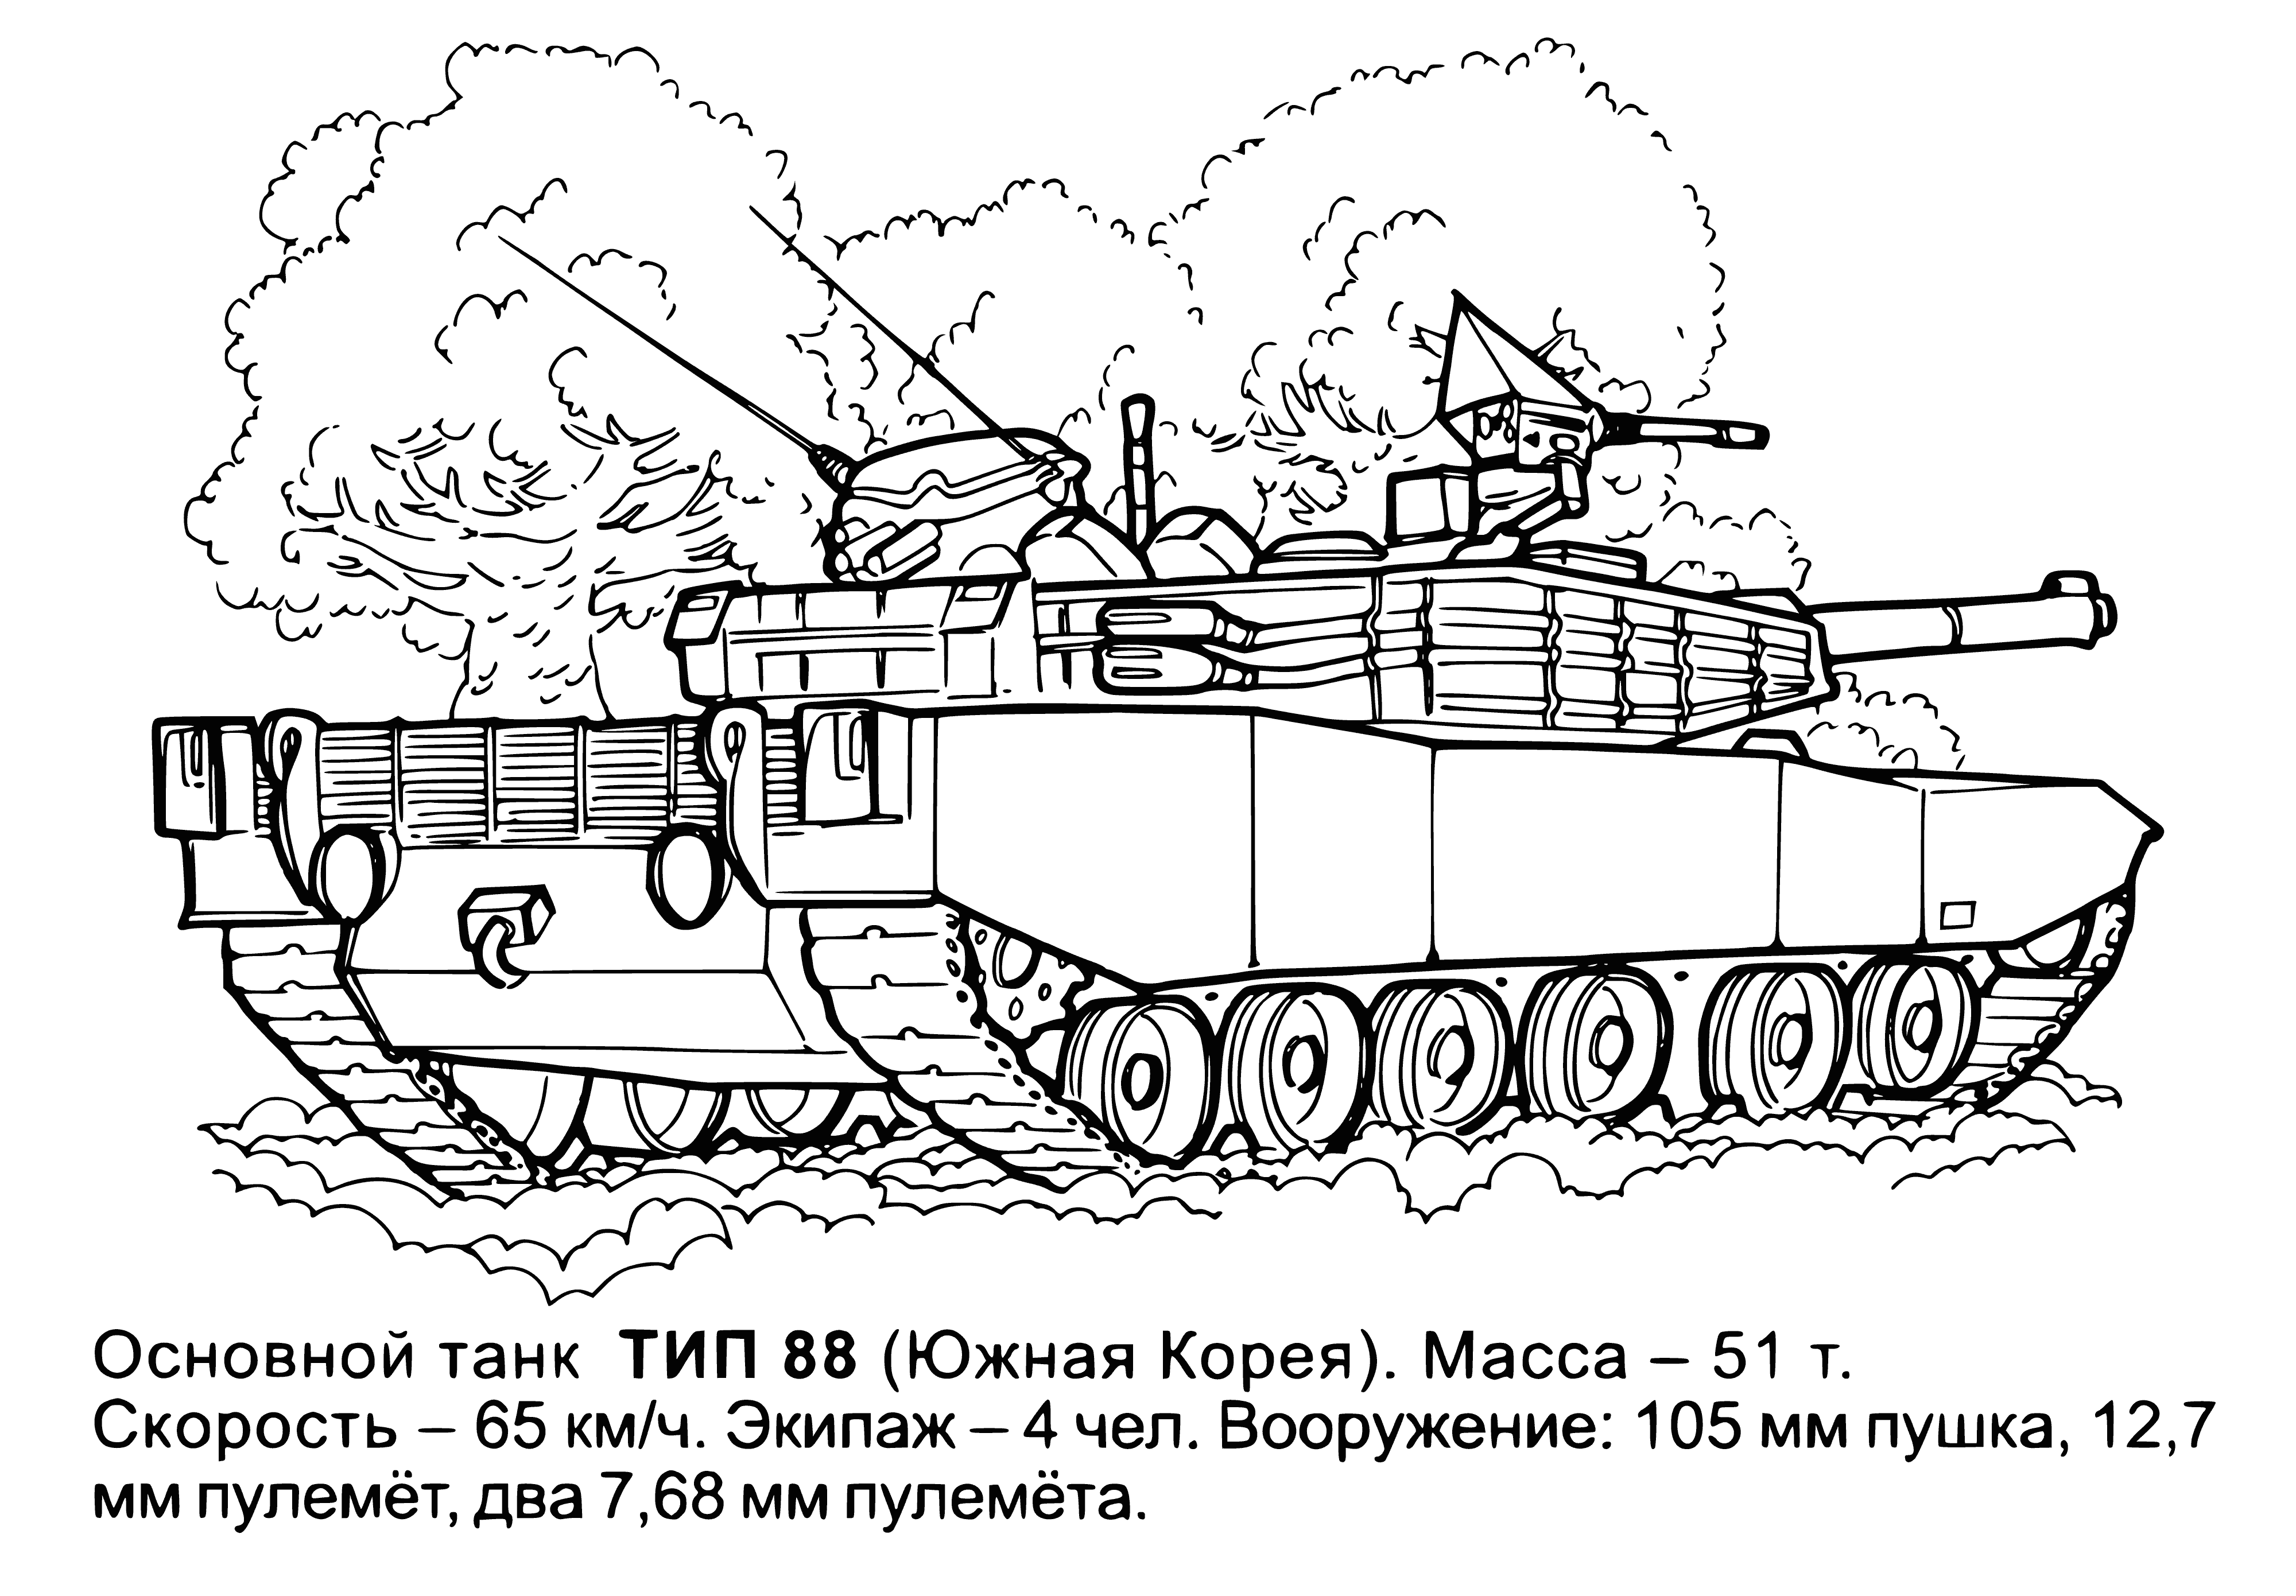 coloring page: 3 soldiers on a military tank in grassy field; they wear green camo & the tank is dark green w/ highlight.